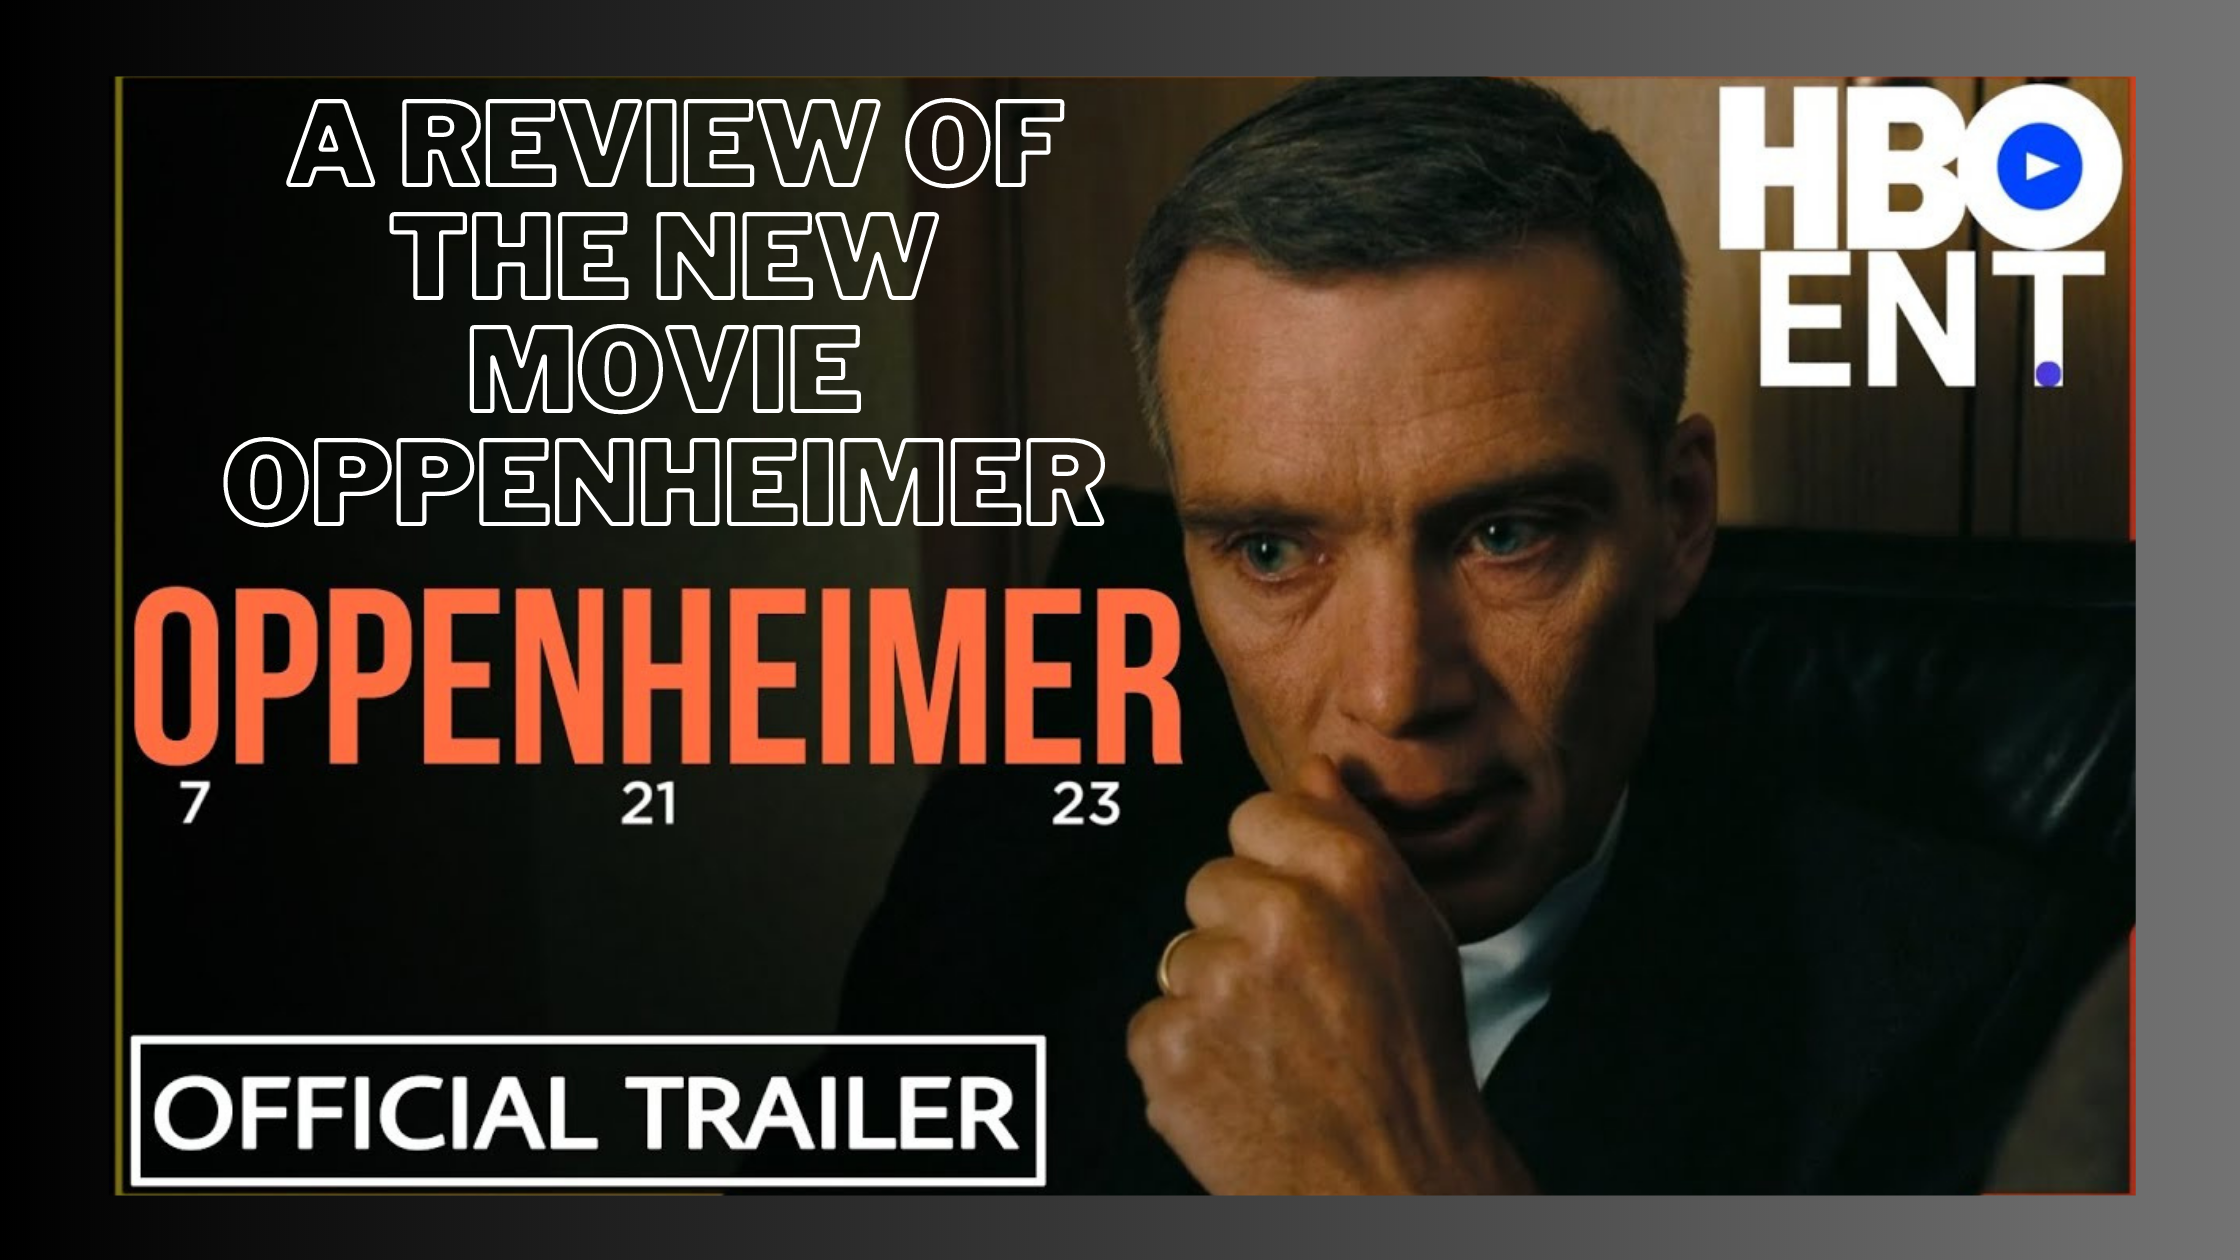  A review of the new movie Oppenheimer